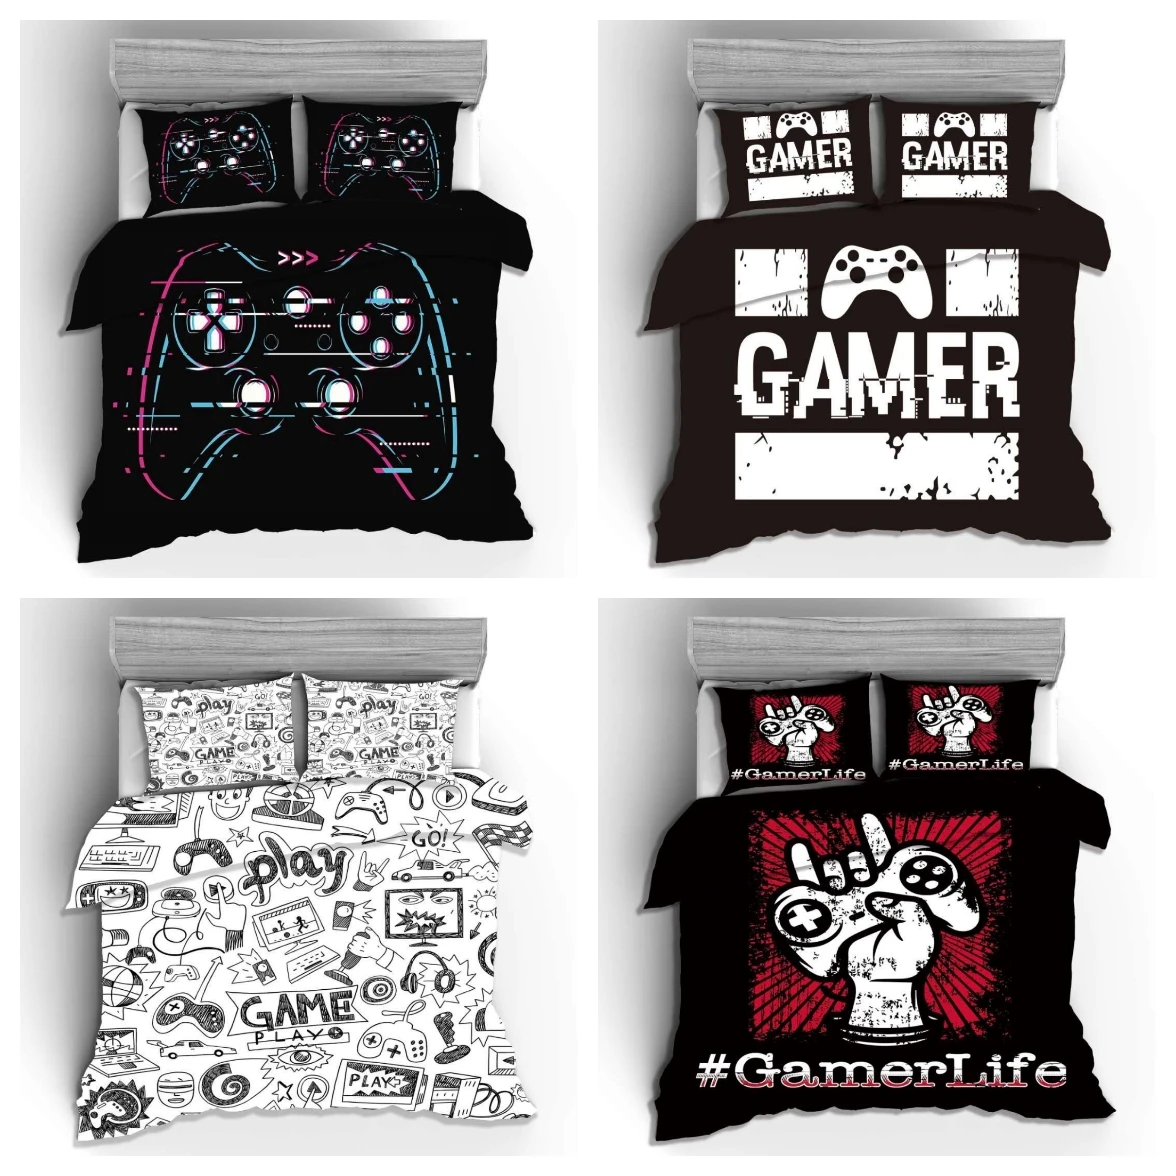 

3d Digital Gamer Bedding Set Quilt Cover With Pillowcases Twin 2/3Pcs Video Game Comforter Cover Full Queen King Double Size